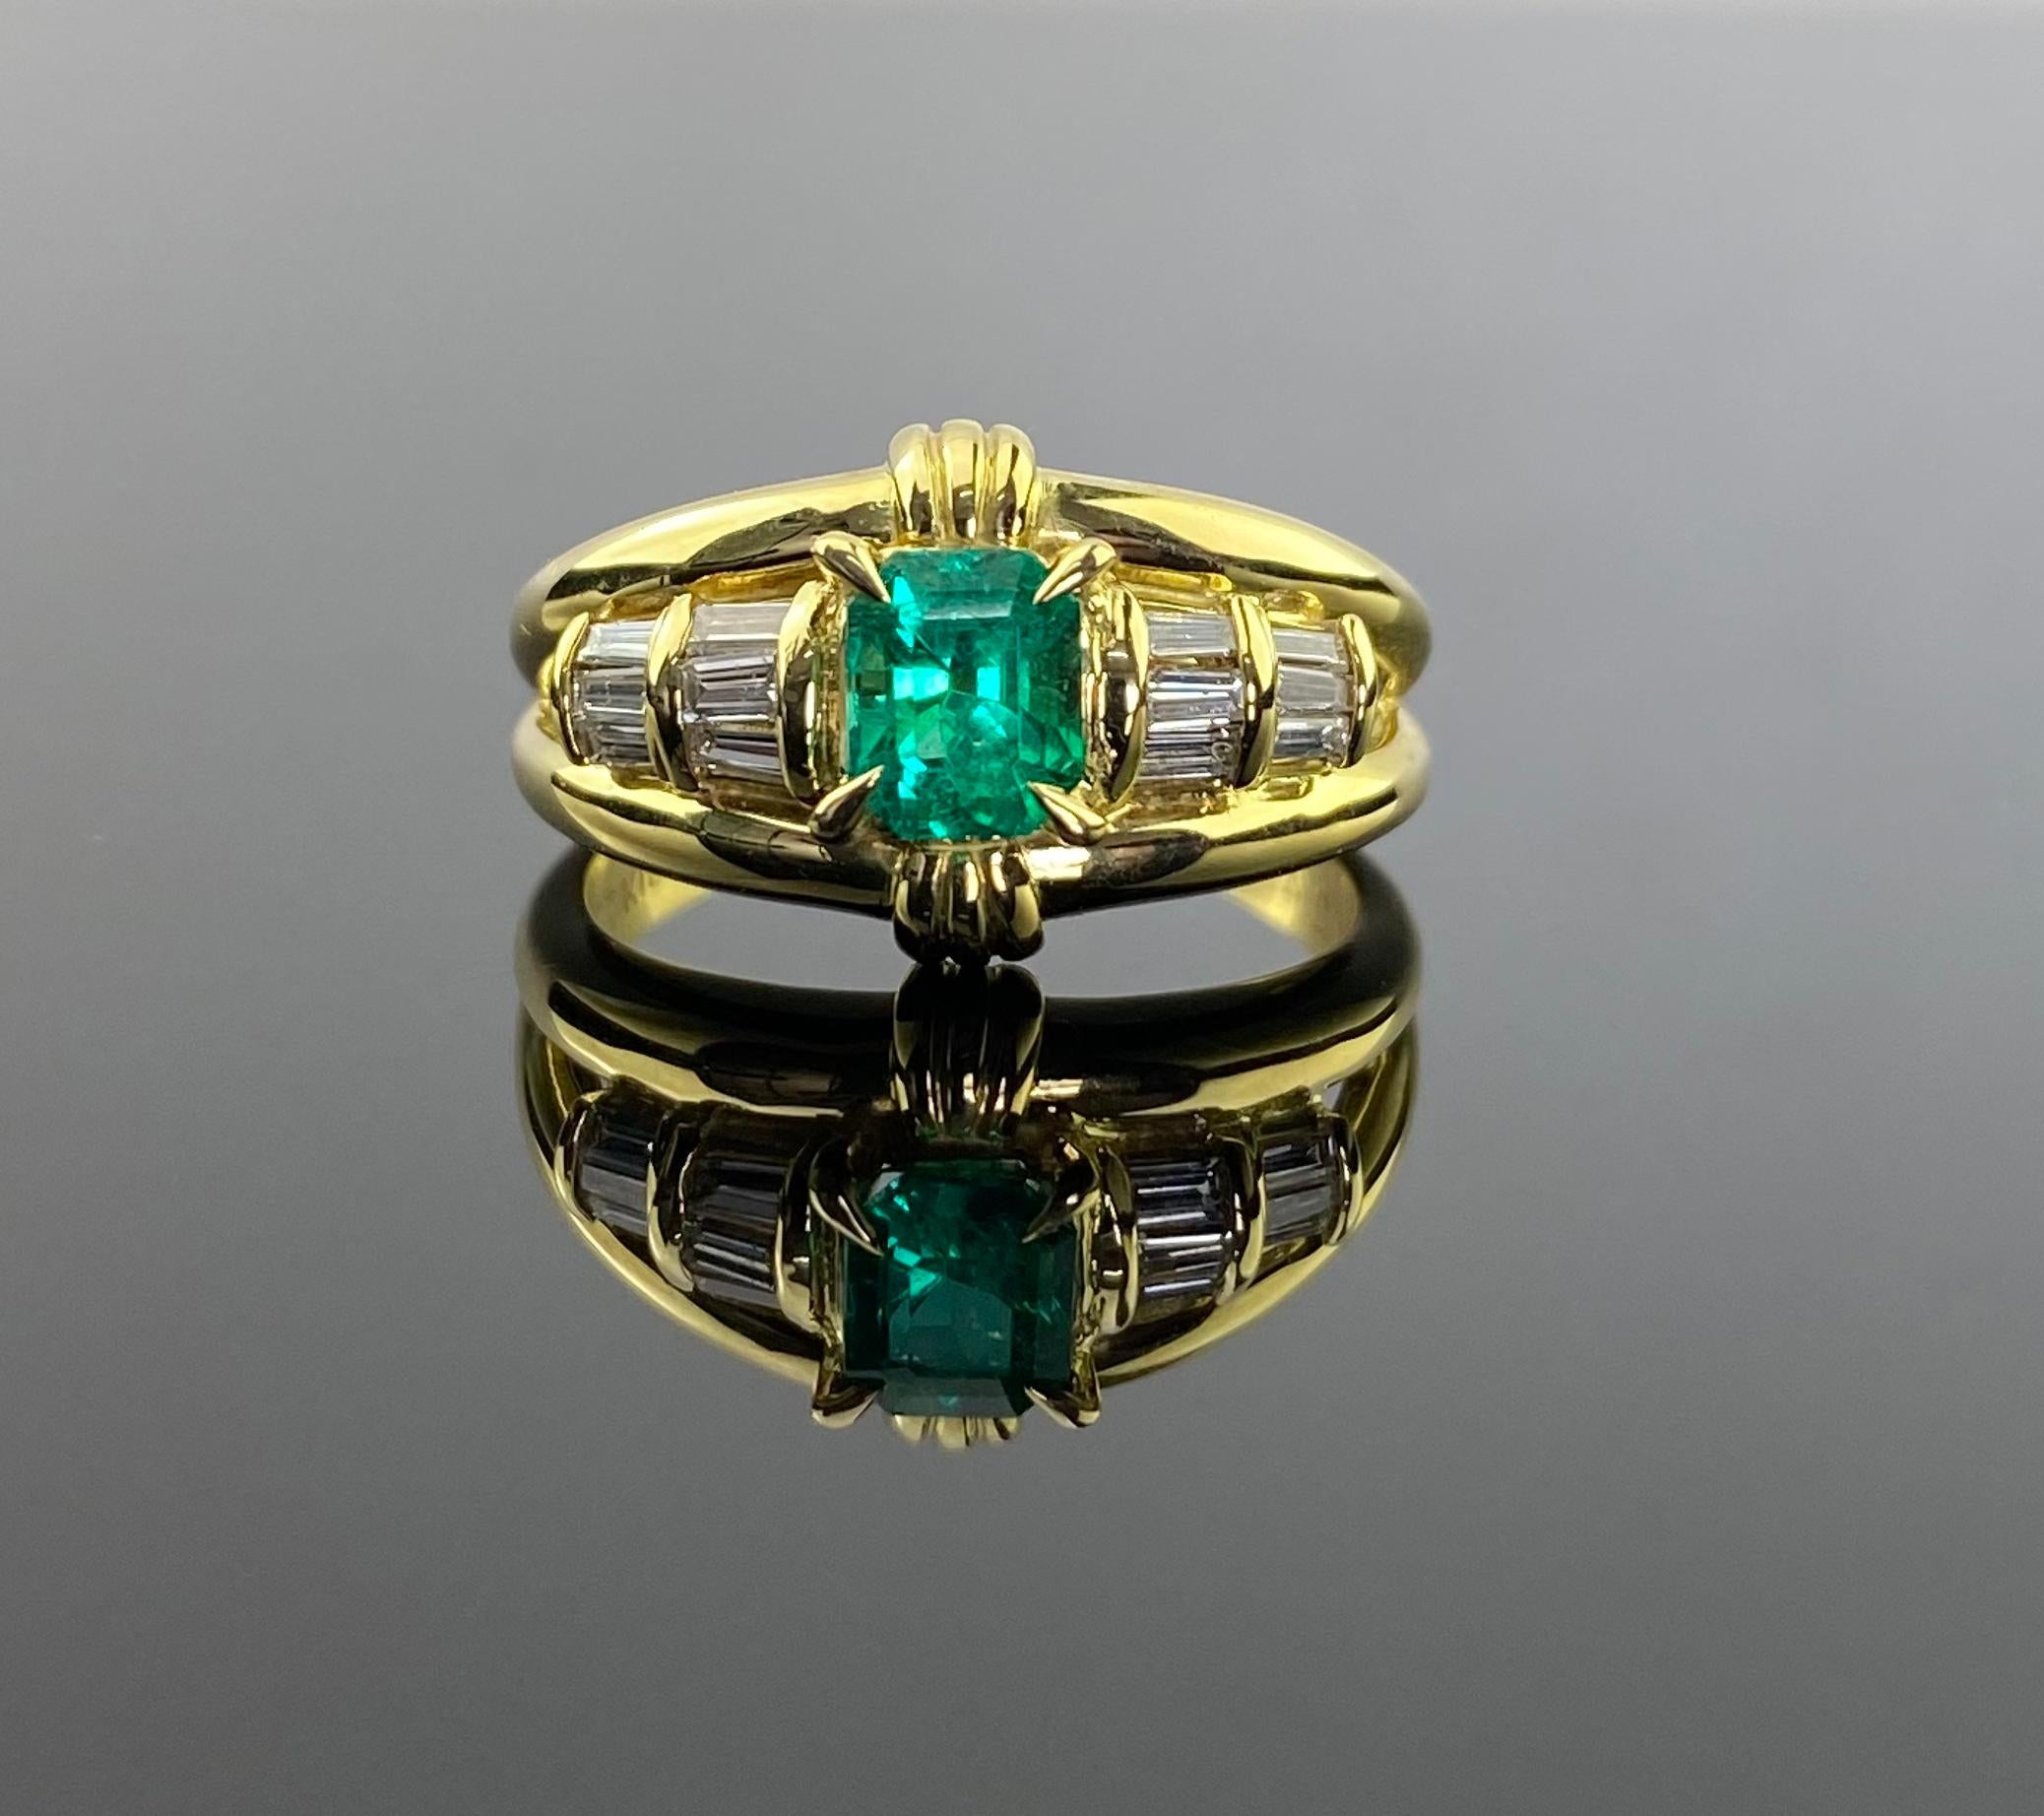 Elevate your elegance with this exquisite 18K gold ring, adorned with a stunning 0.54 carat Colombian Emerald and 0.24 carat diamond. The vivid green emerald takes center stage, radiating with natural beauty and energy, while the sparkling diamonds